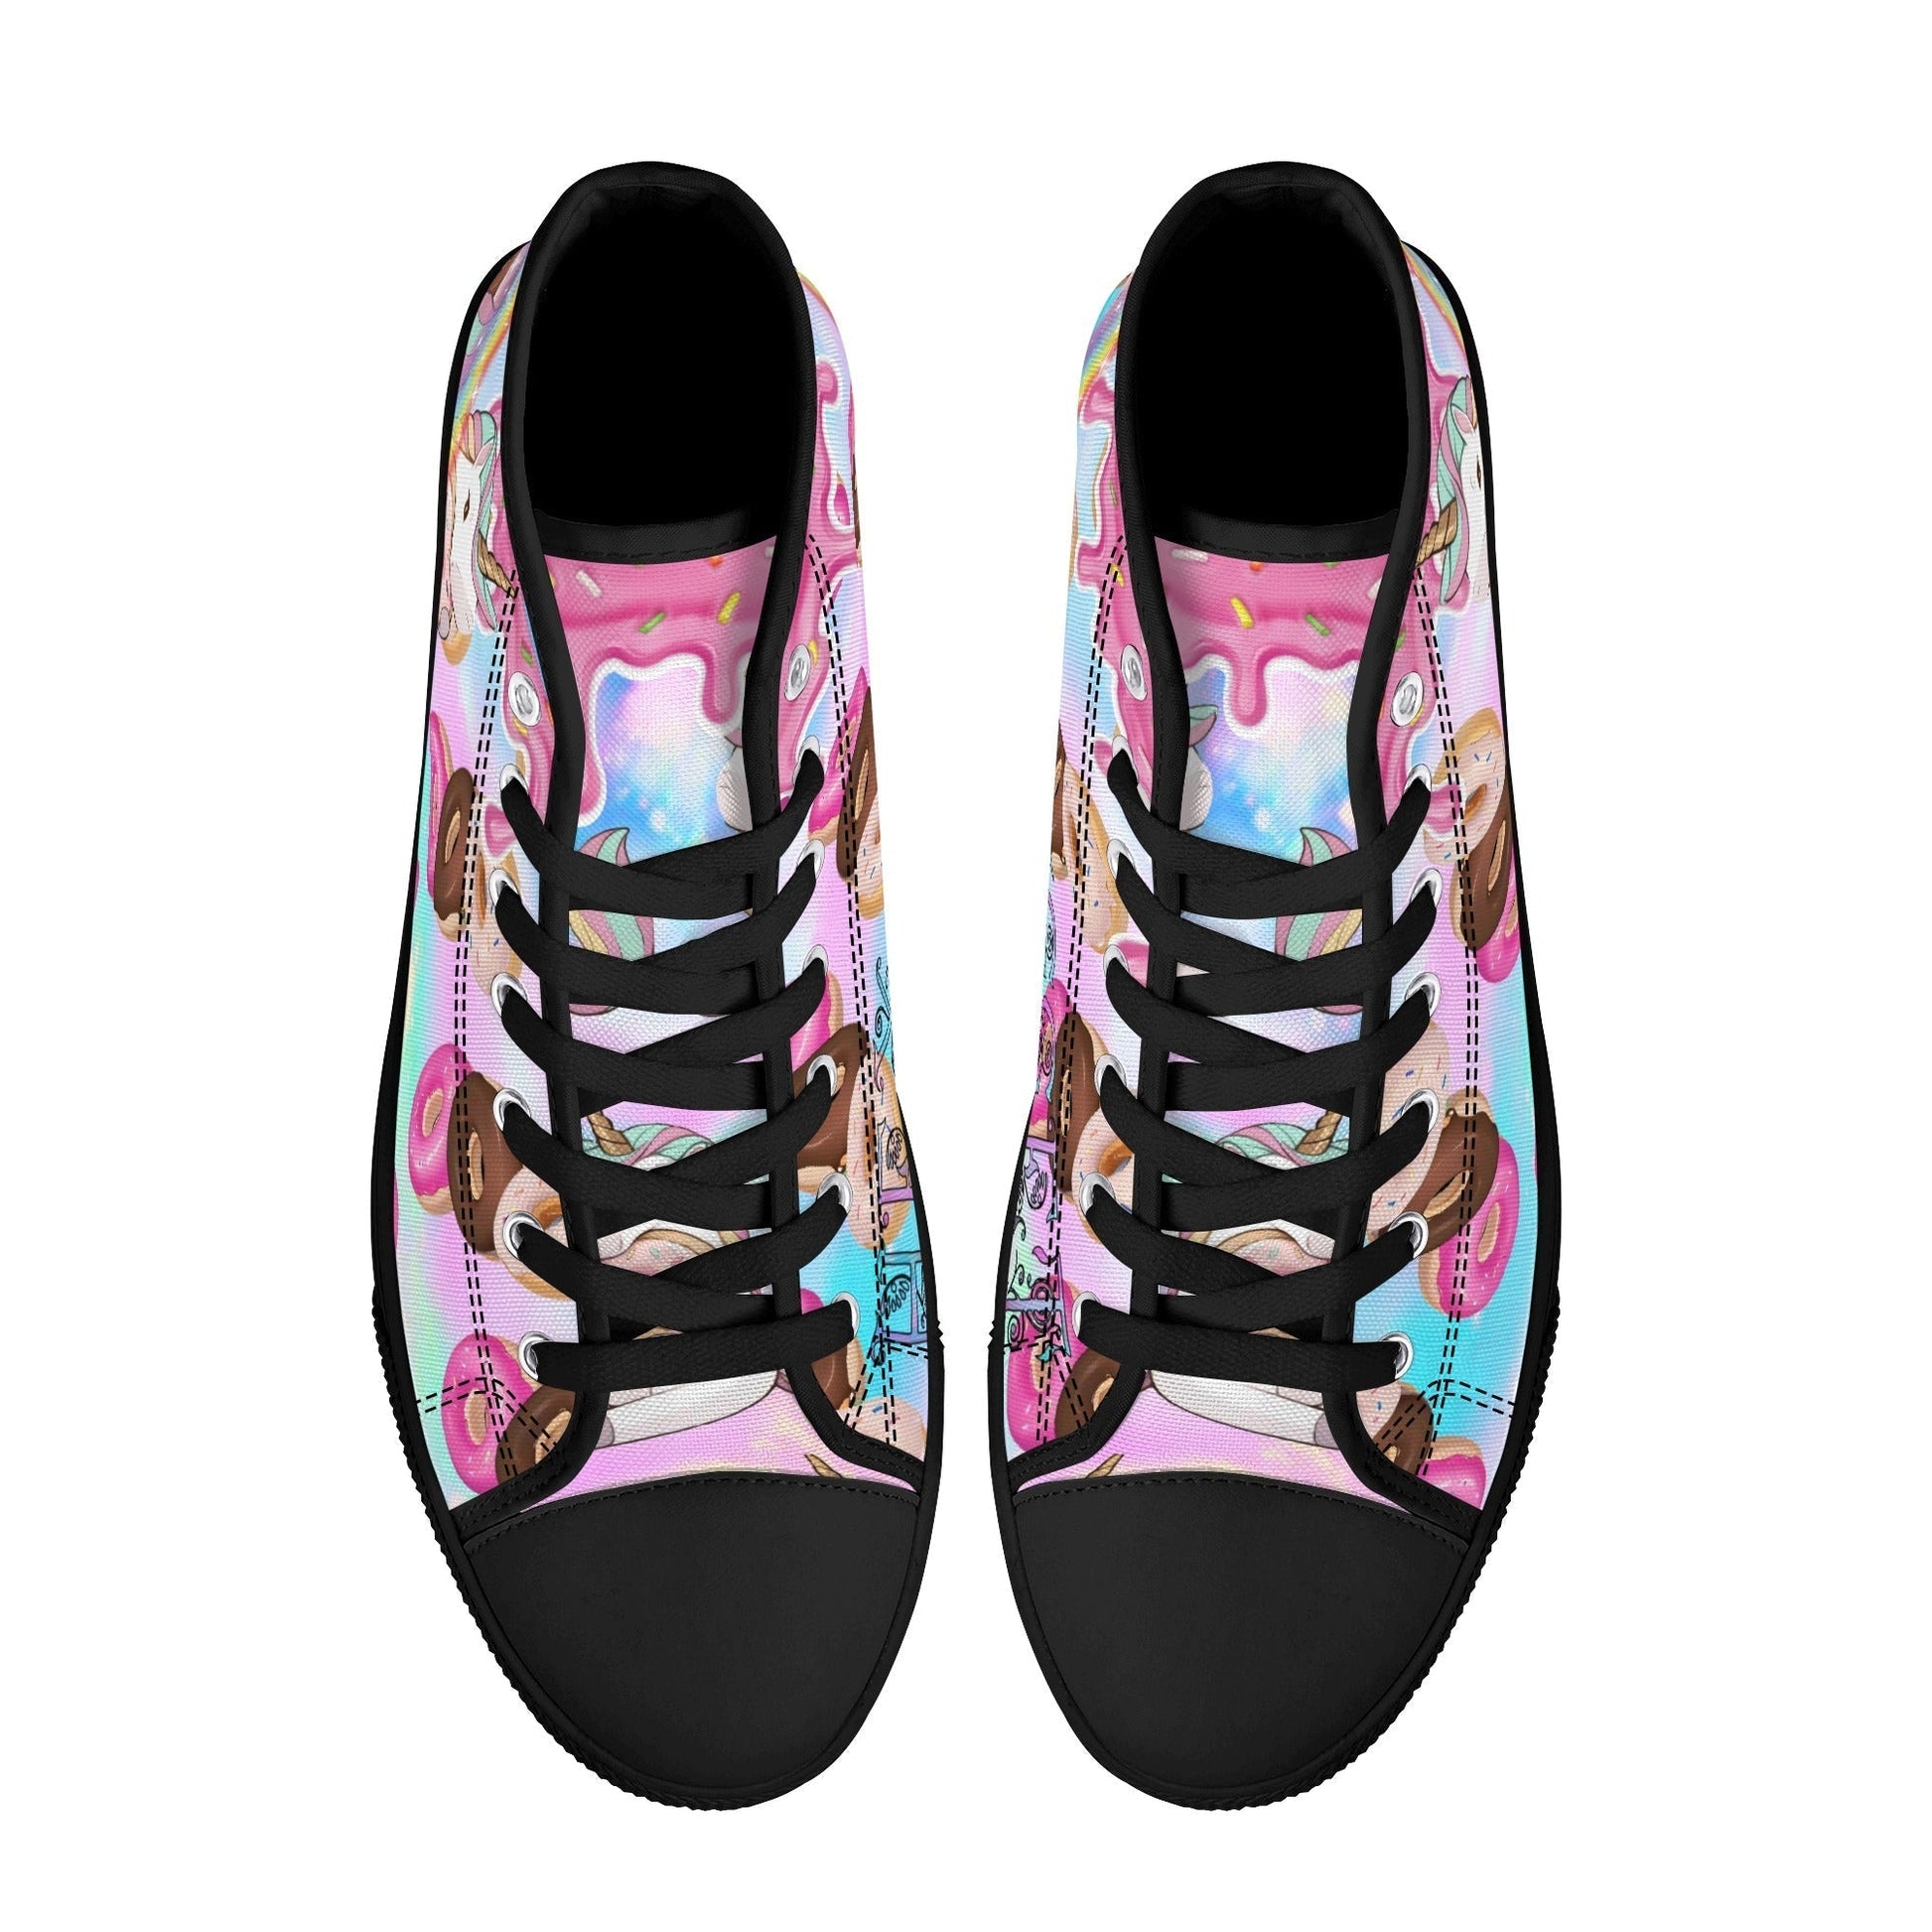 Stand out  with the  My Little Doughnut Womens High Top Canvas Shoes  available at Hey Nugget. Grab yours today!